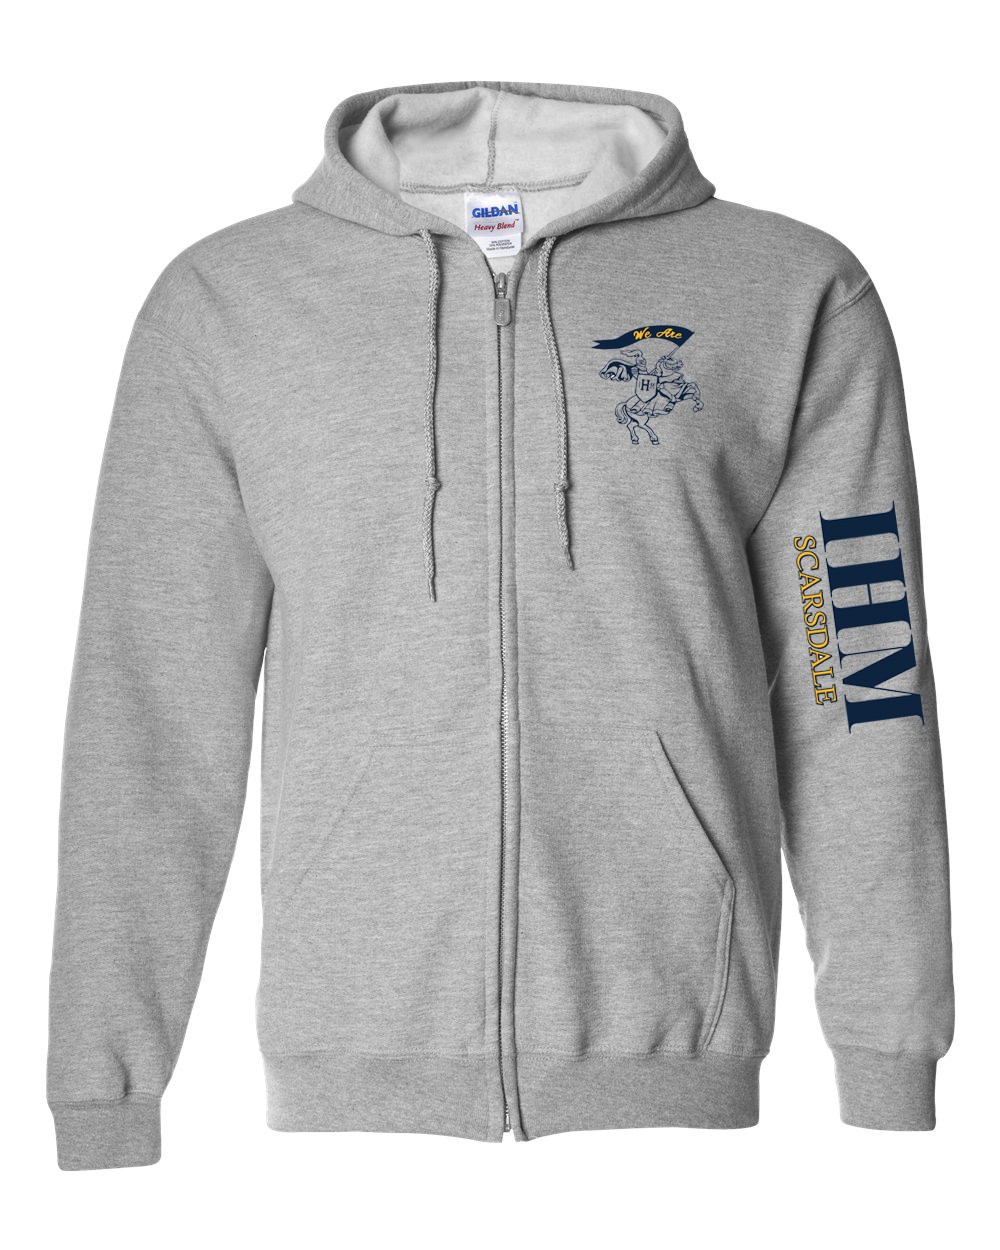 IHM Dad Spirit Hoodie w/ Navy Knight Logo - Please allow 2-3 Weeks for Delivery